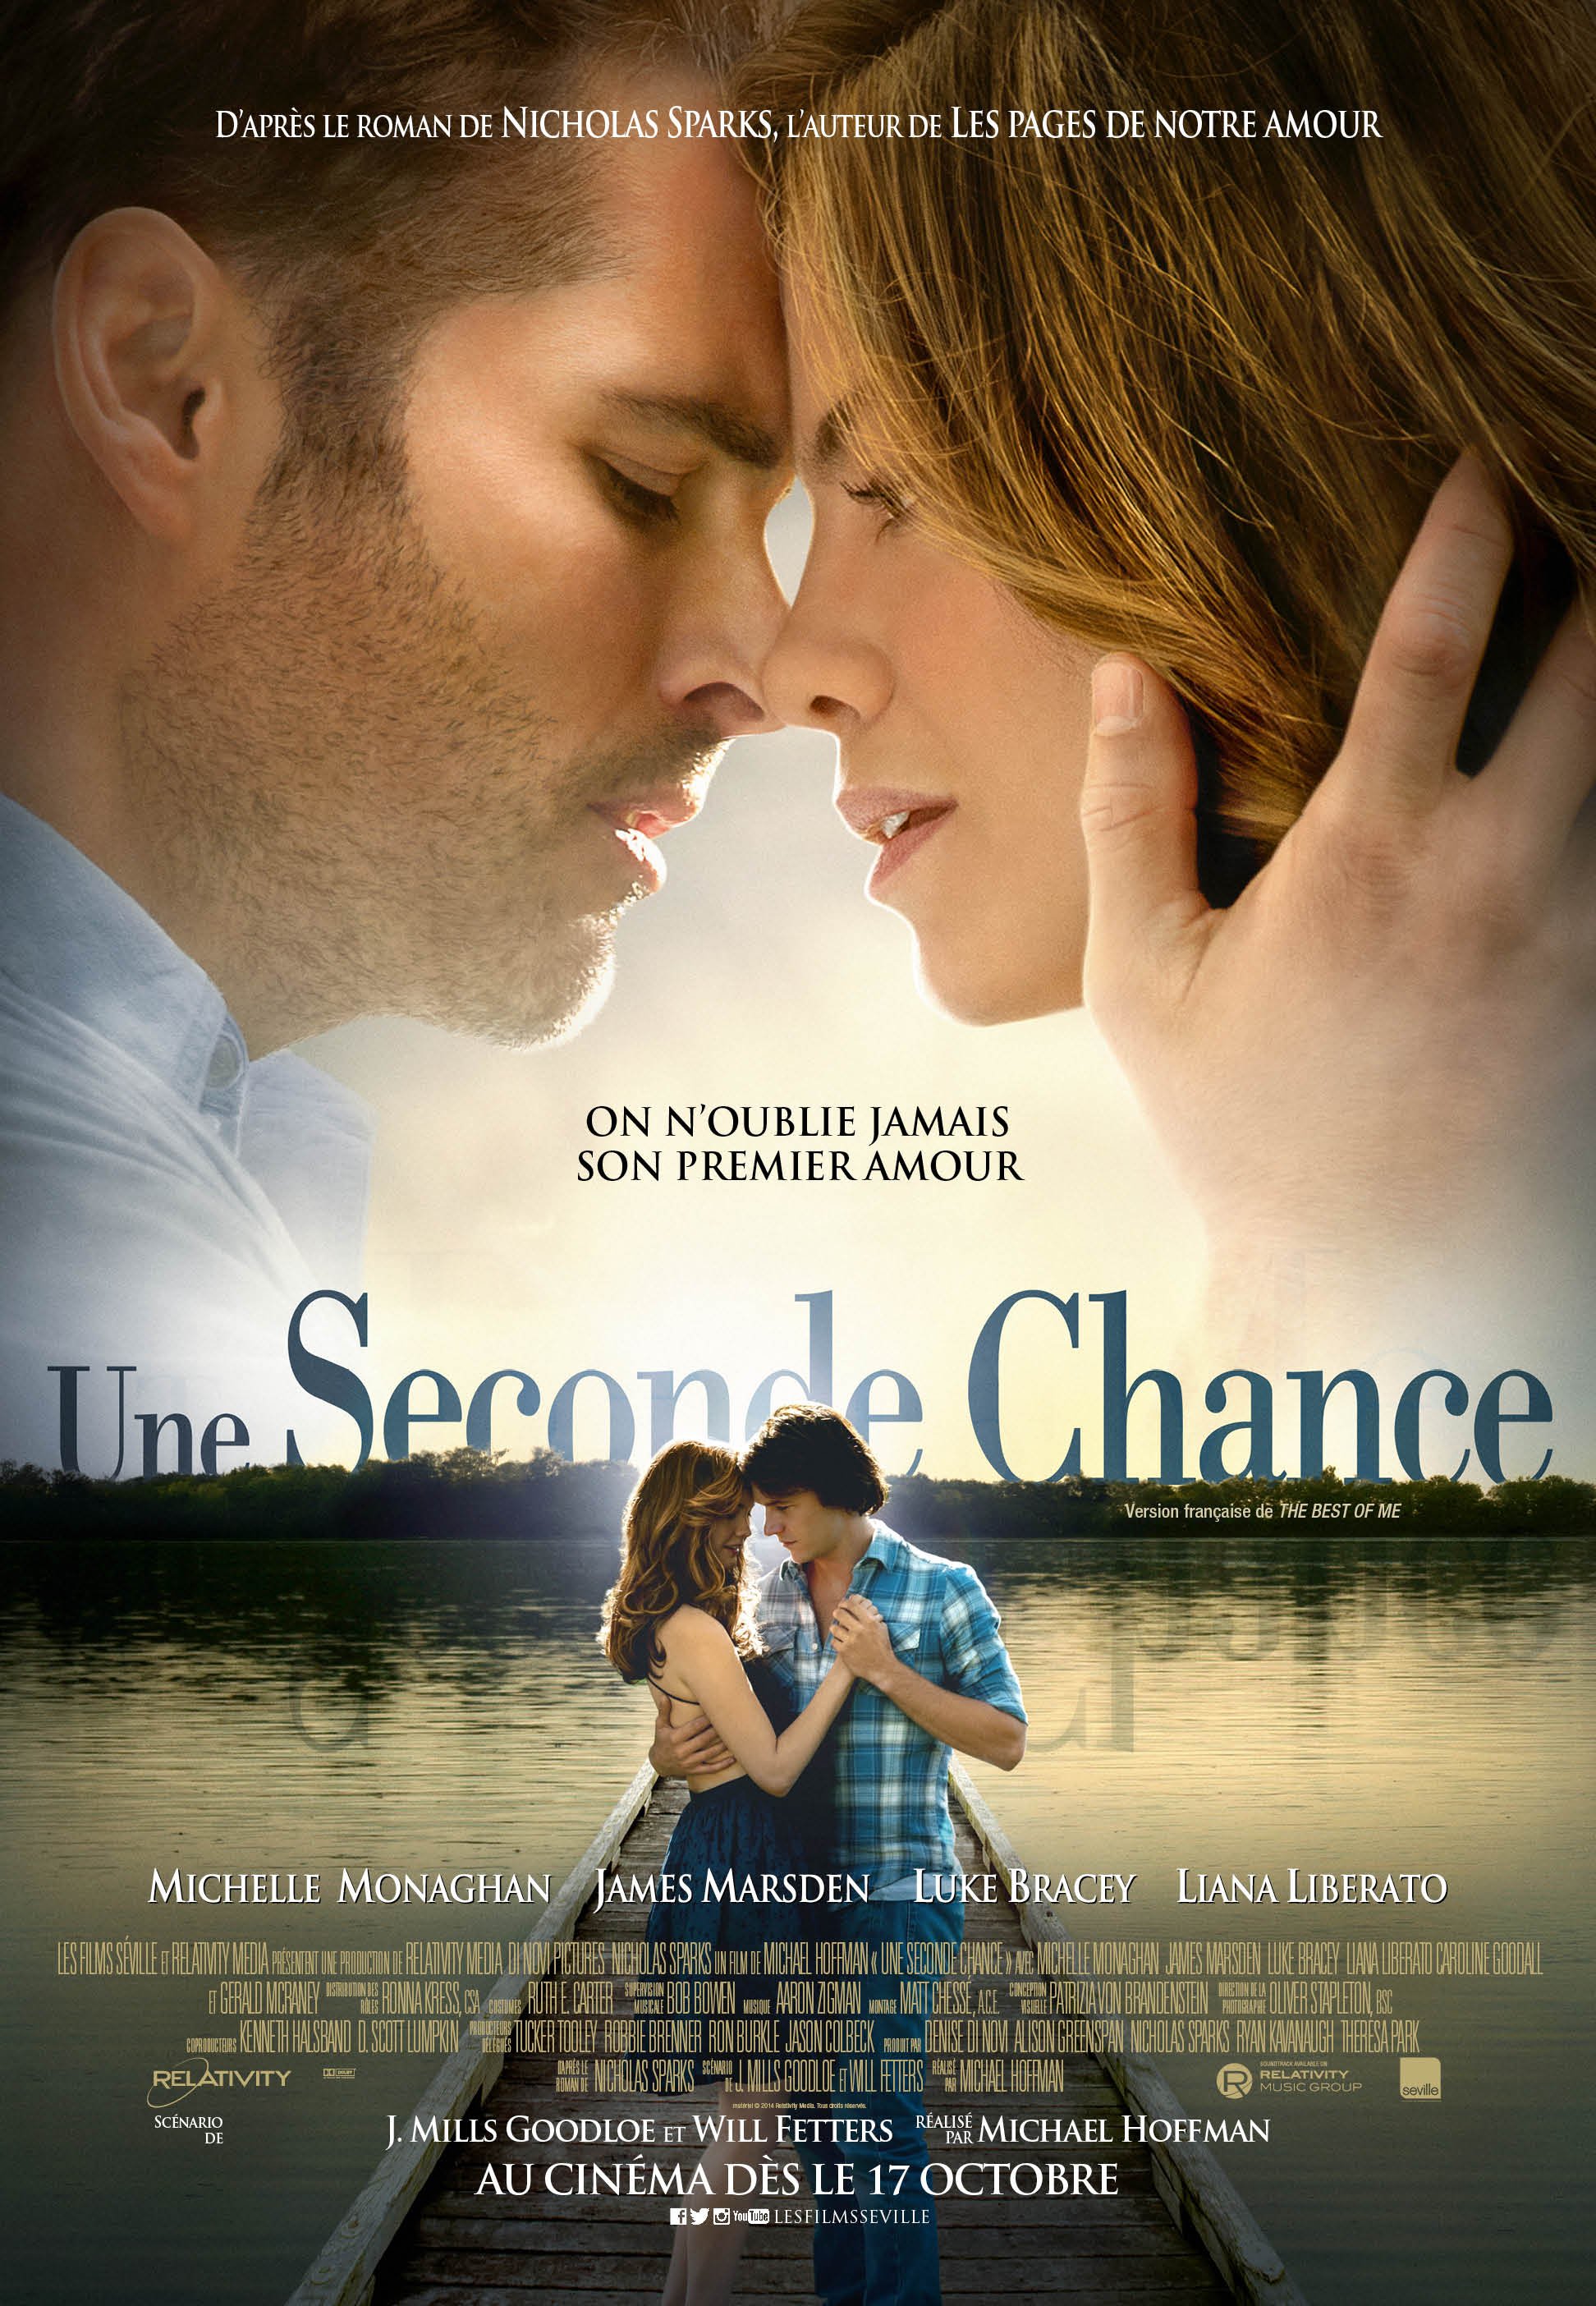 Poster of the movie Une Seconde Chance